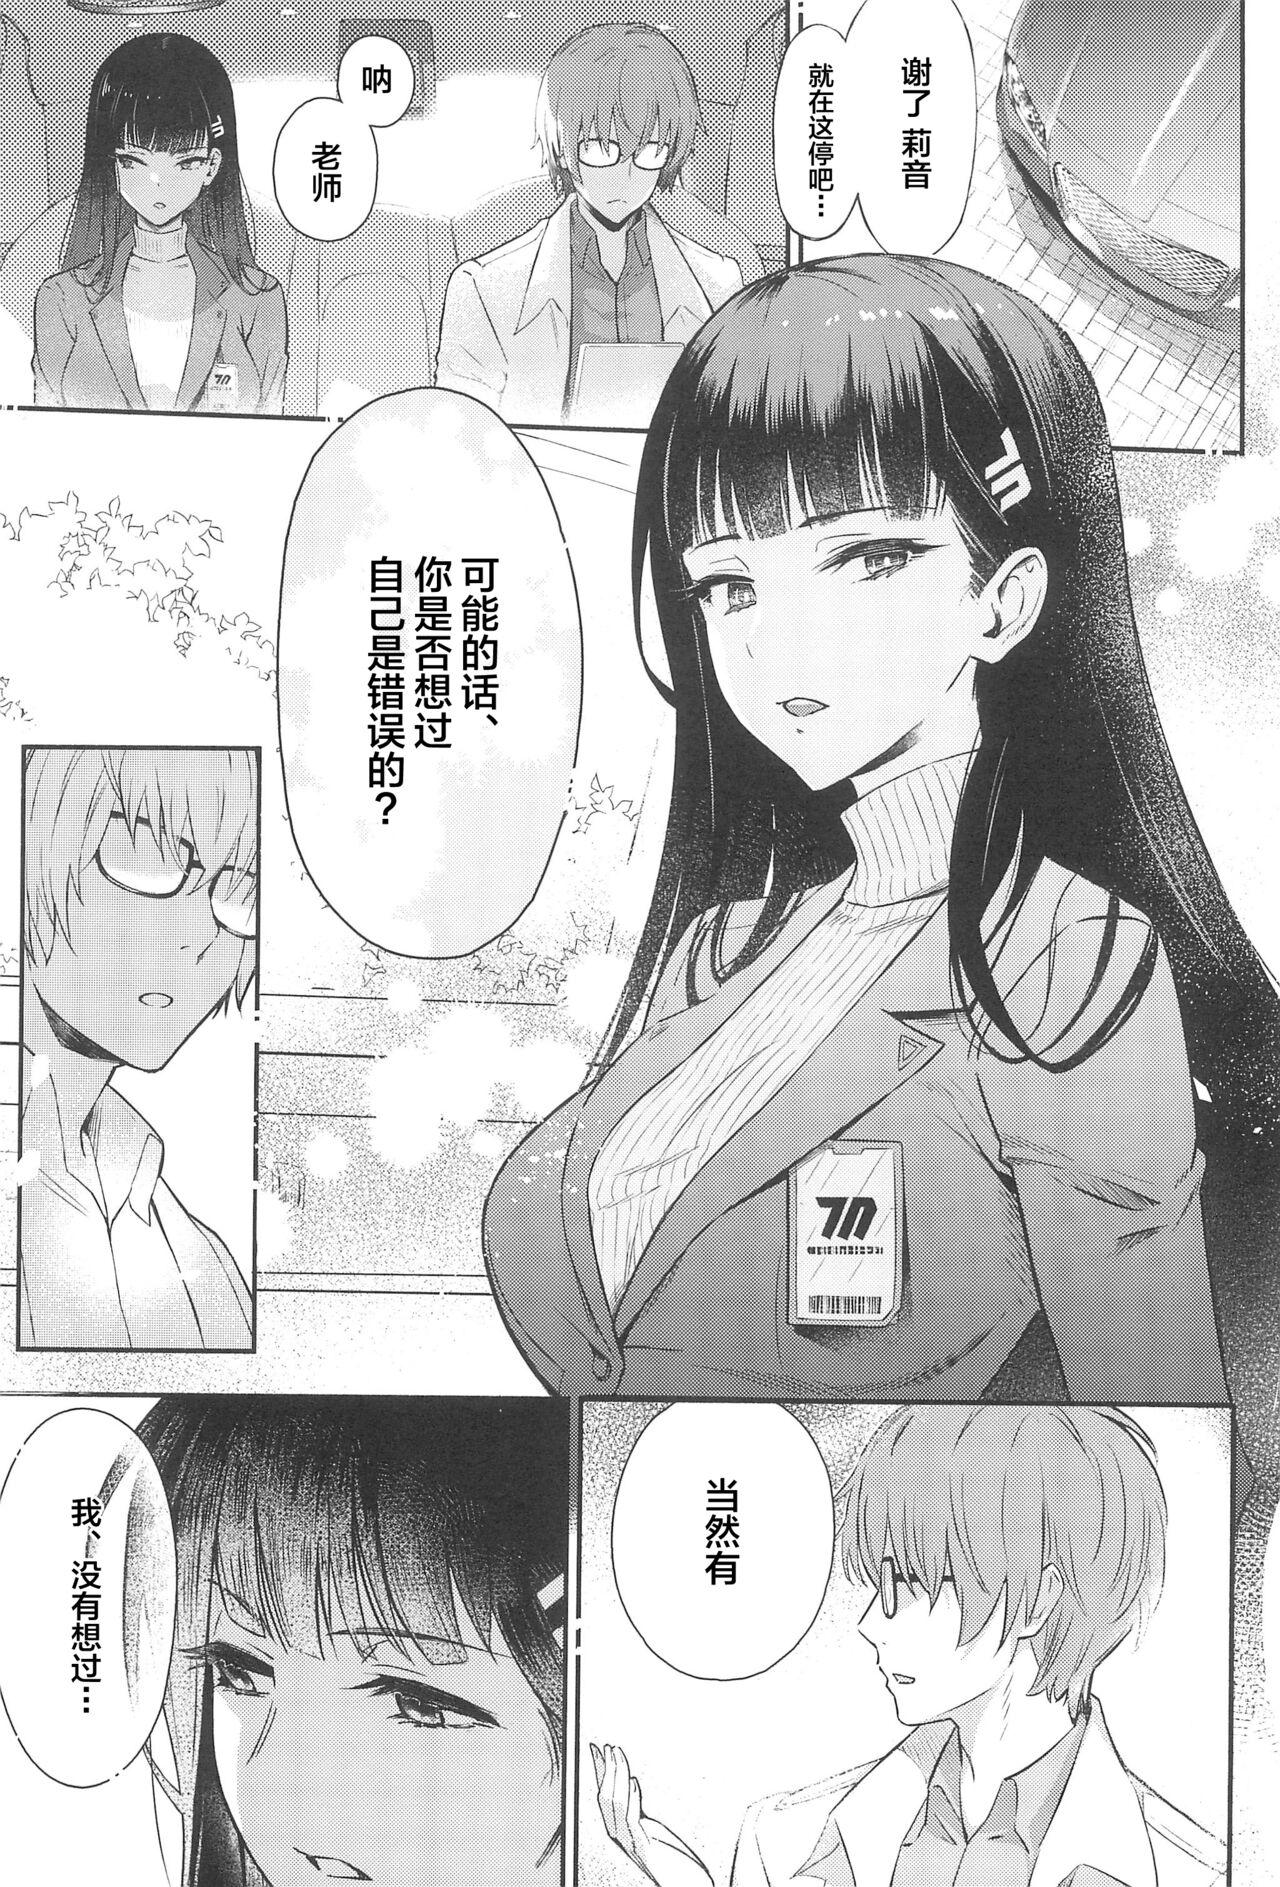 Tiny Girl (C102) [Shiro no Ie (Yochiki)] Rio-chan wa Otosaretai. - Rio Want To Be Fall in Love (Blue Archive) - Blue archive Gay Trimmed - Page 3